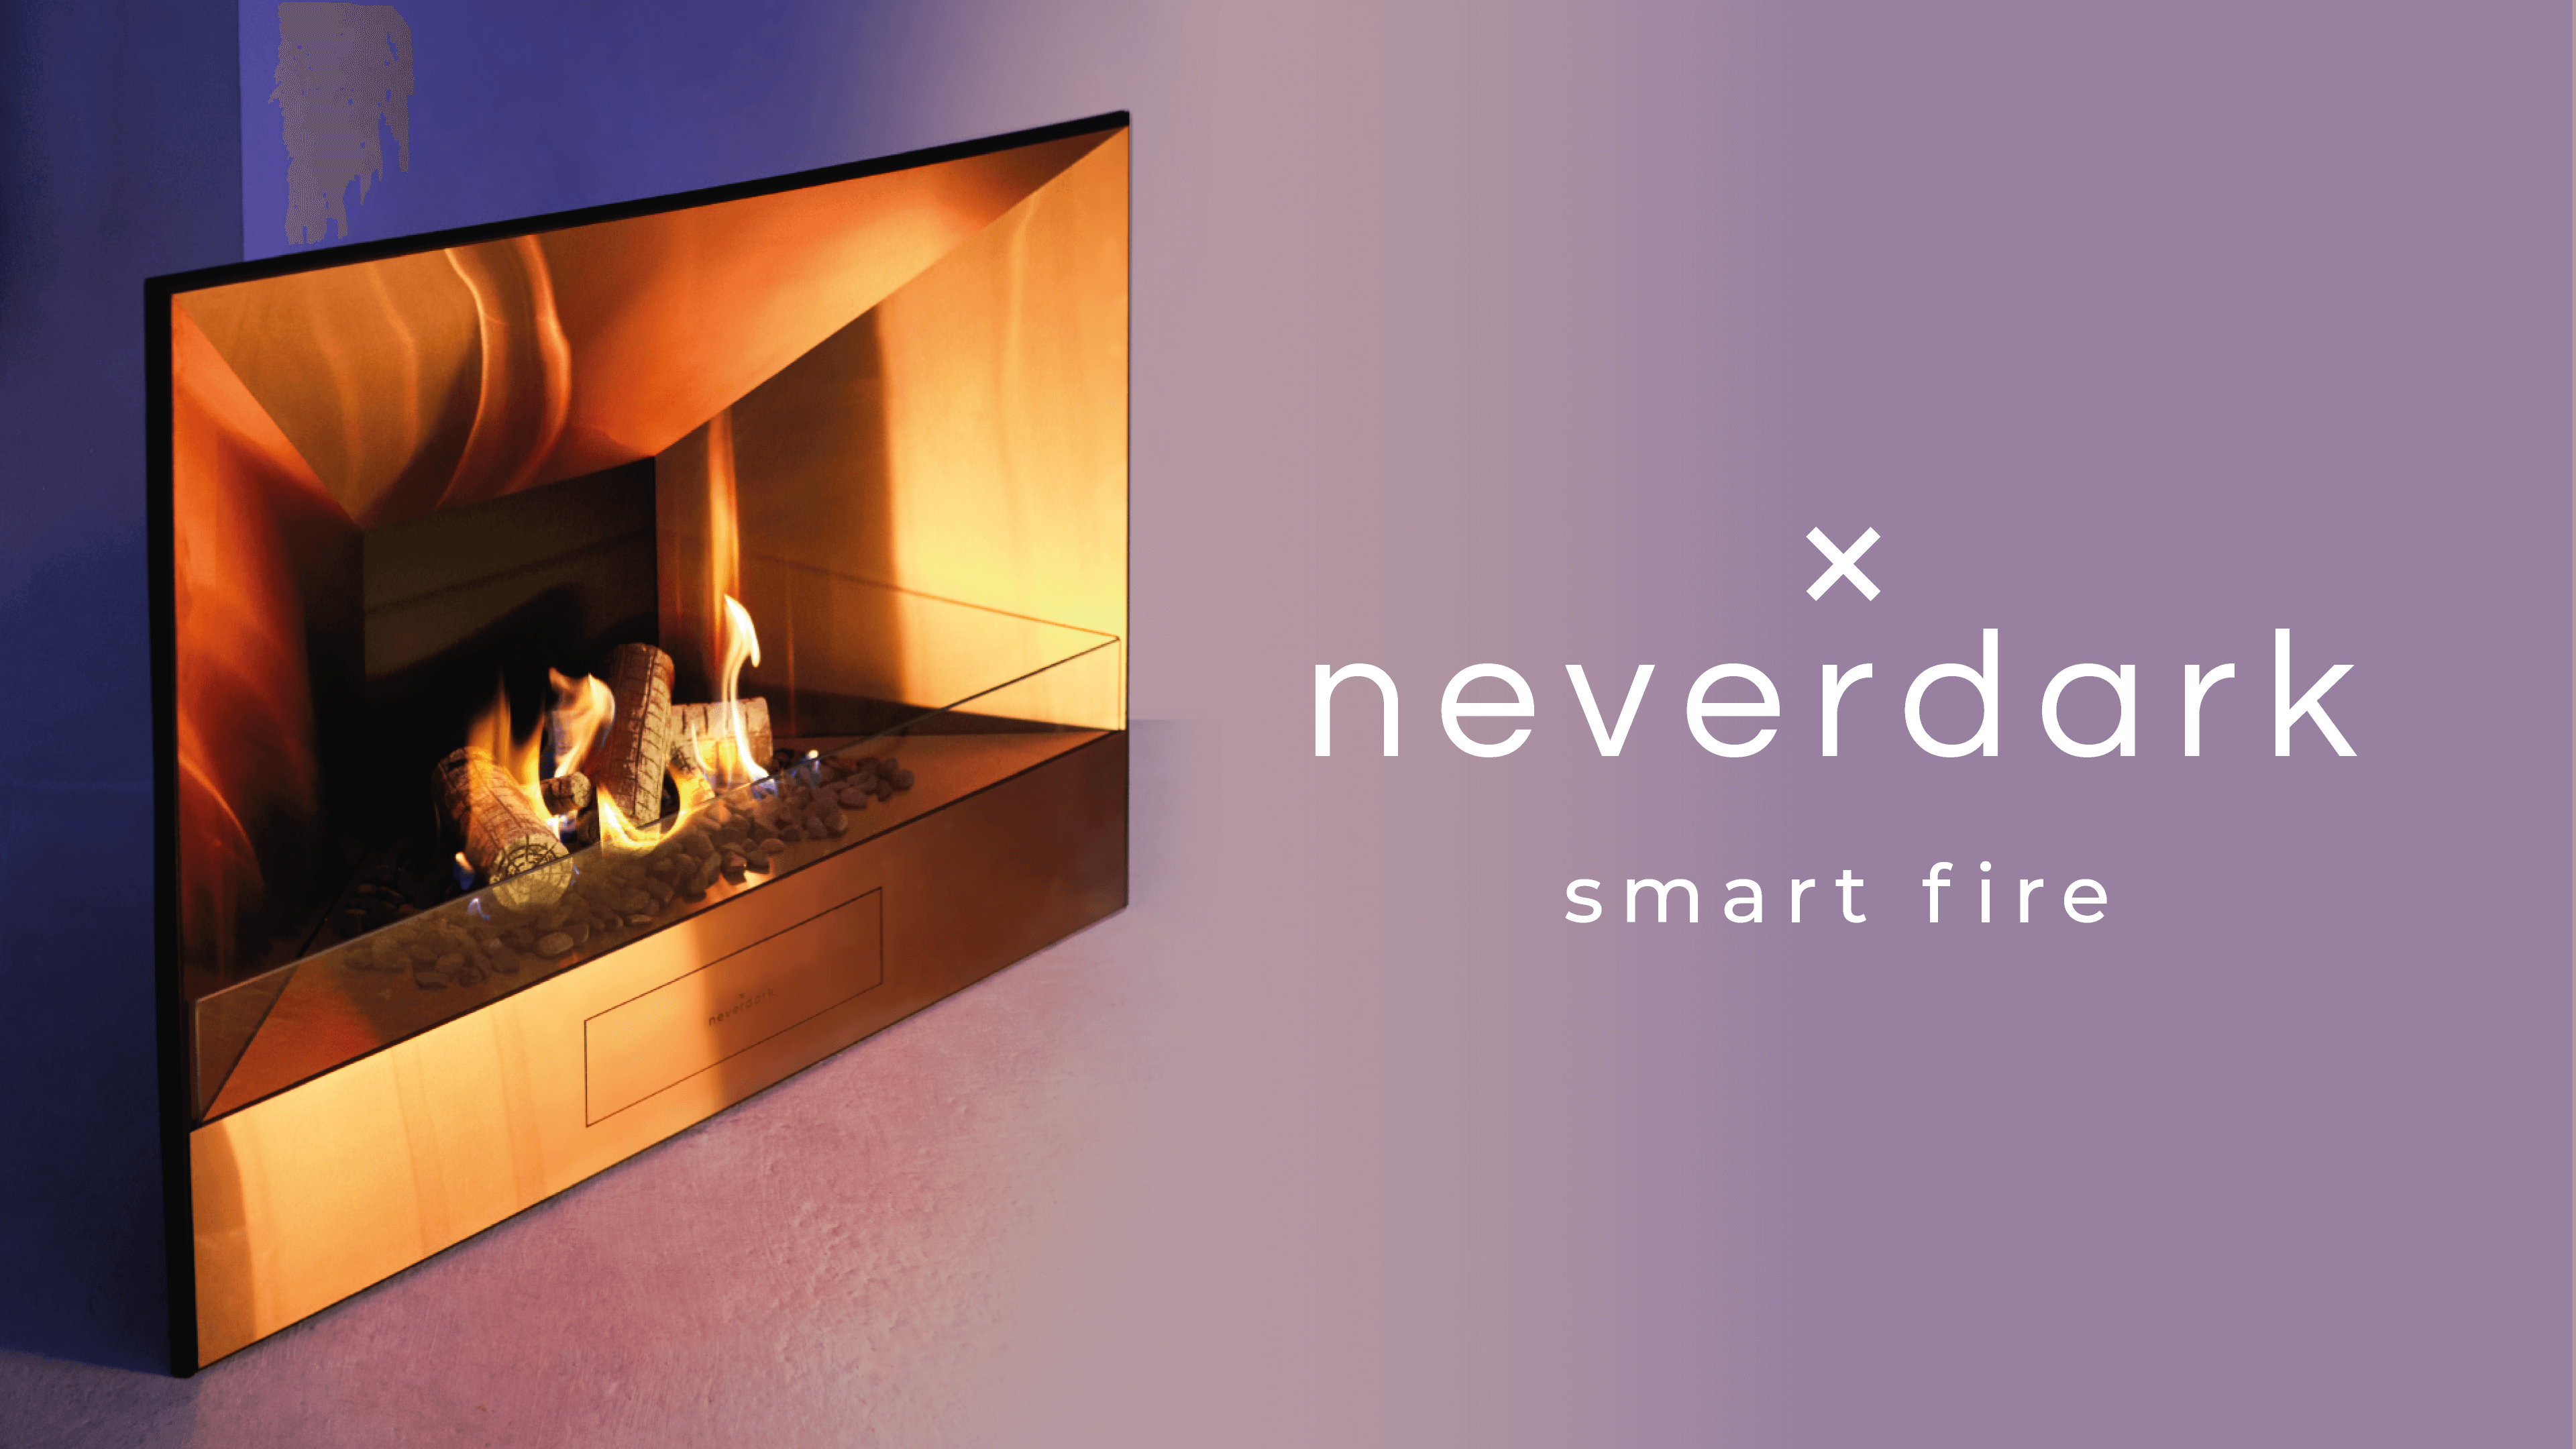 Neverdark: Bringing Light with Innovative Smart Fireplaces for the Comfort of Your Home